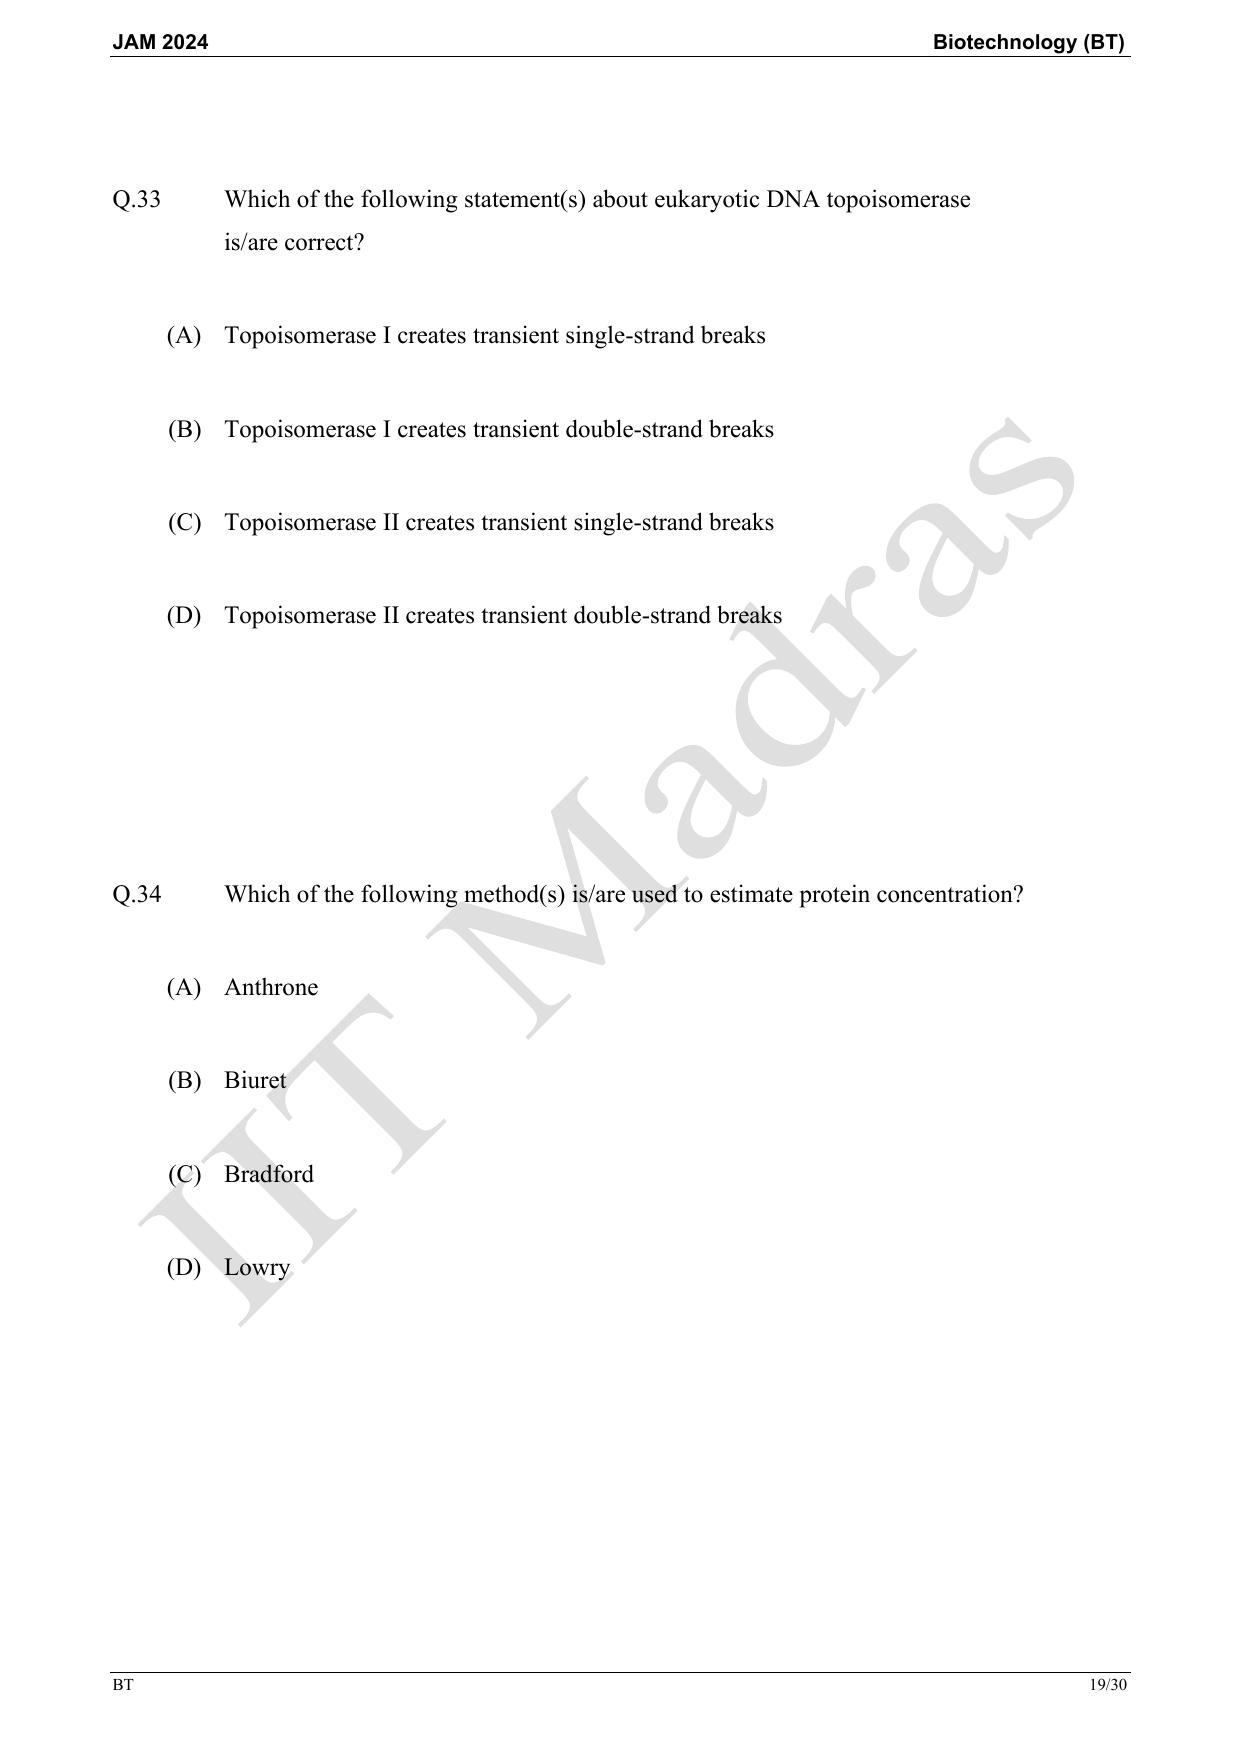 IIT JAM 2024 Biotechnology (BT) Master Question Paper - Page 19